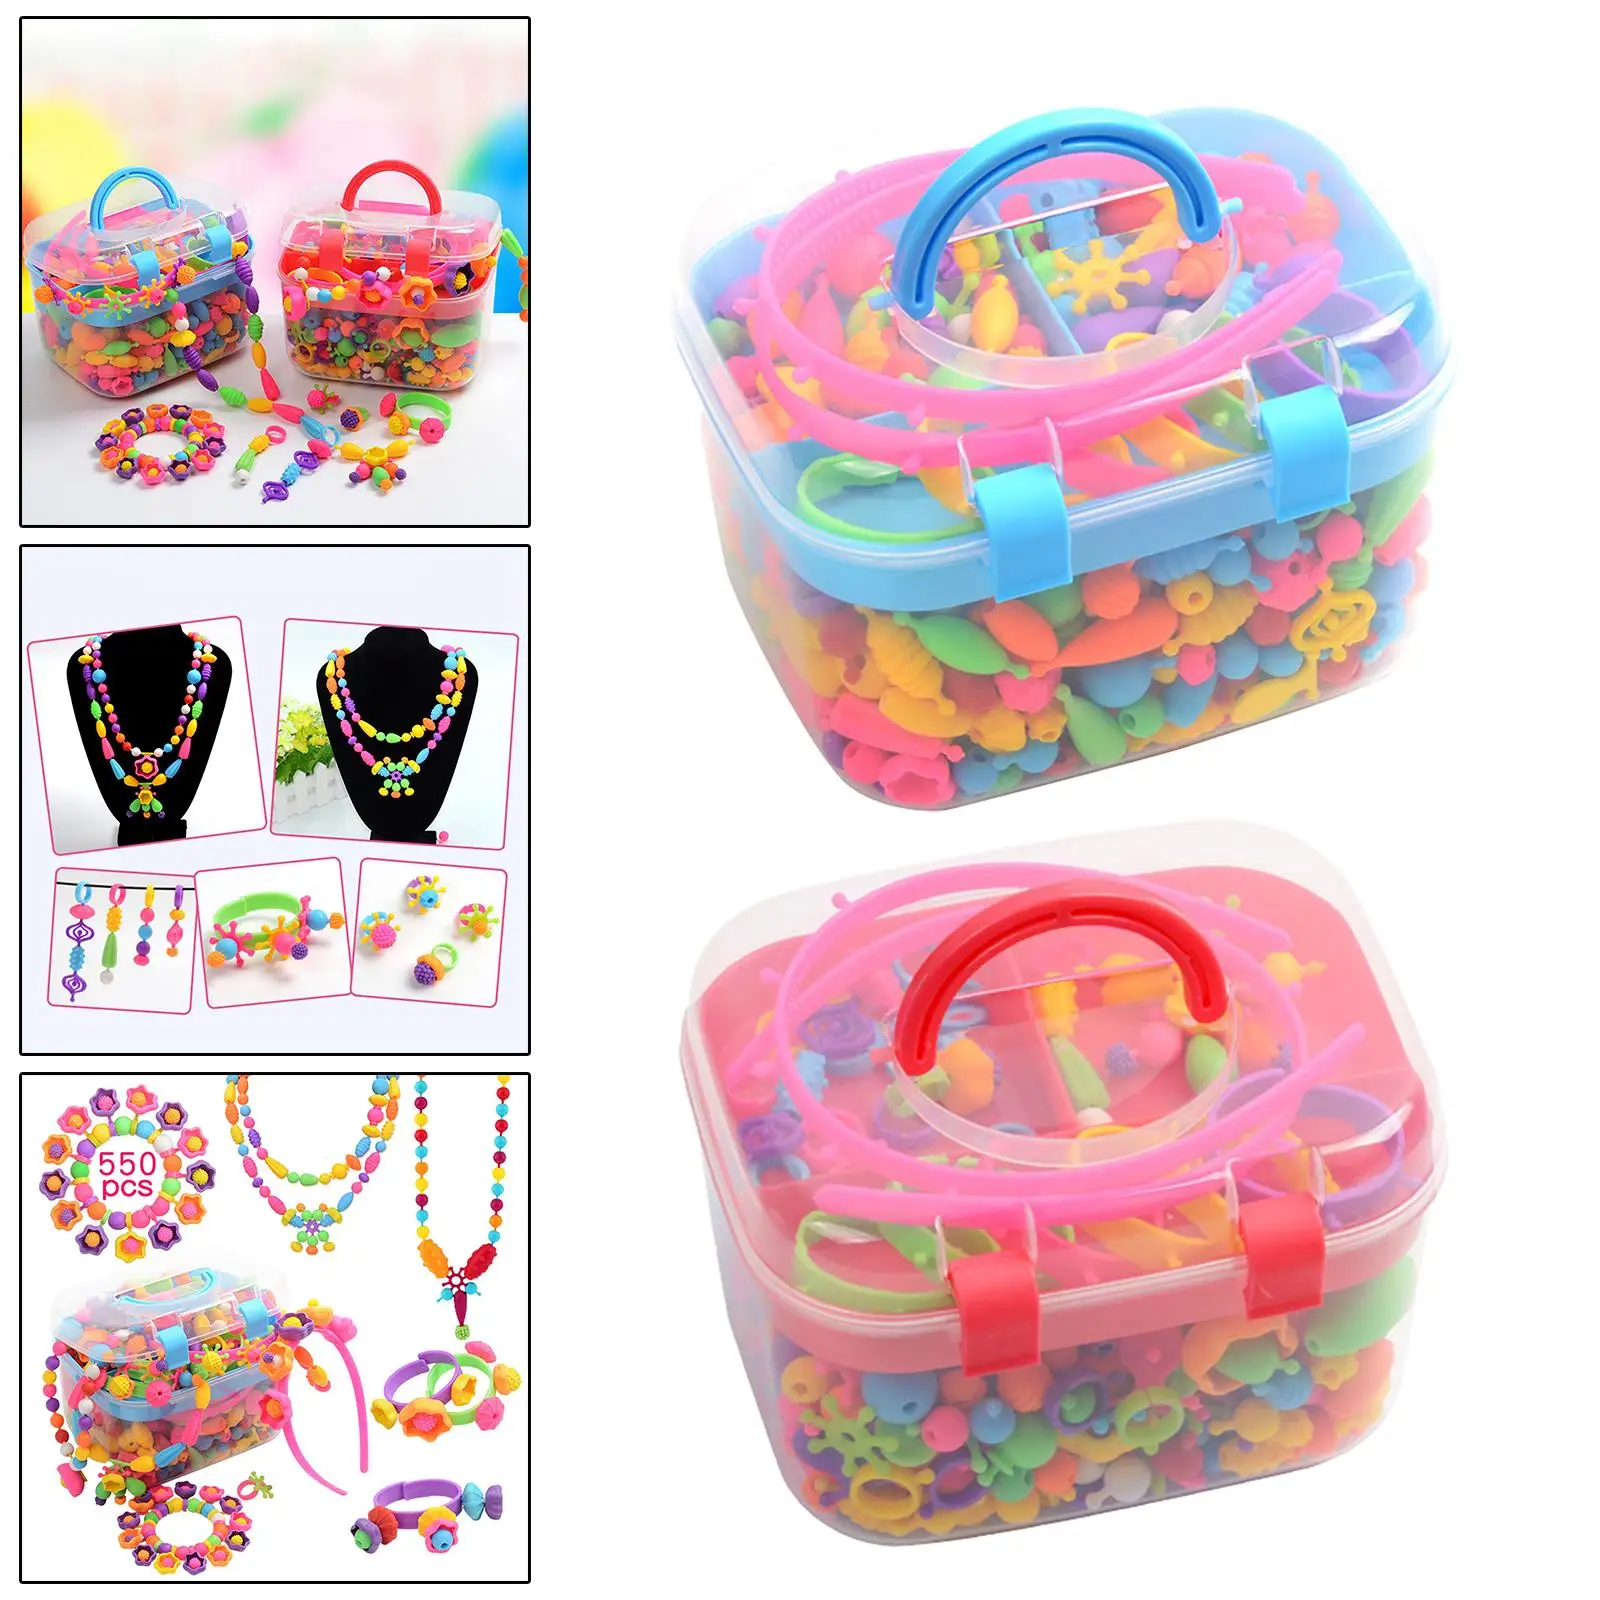 550pcs Pop Beads Jewelry Making Kit Jewelry Set Toys Arts Crafts Snap Together Beads for Earrings Necklace Bracelet Girls